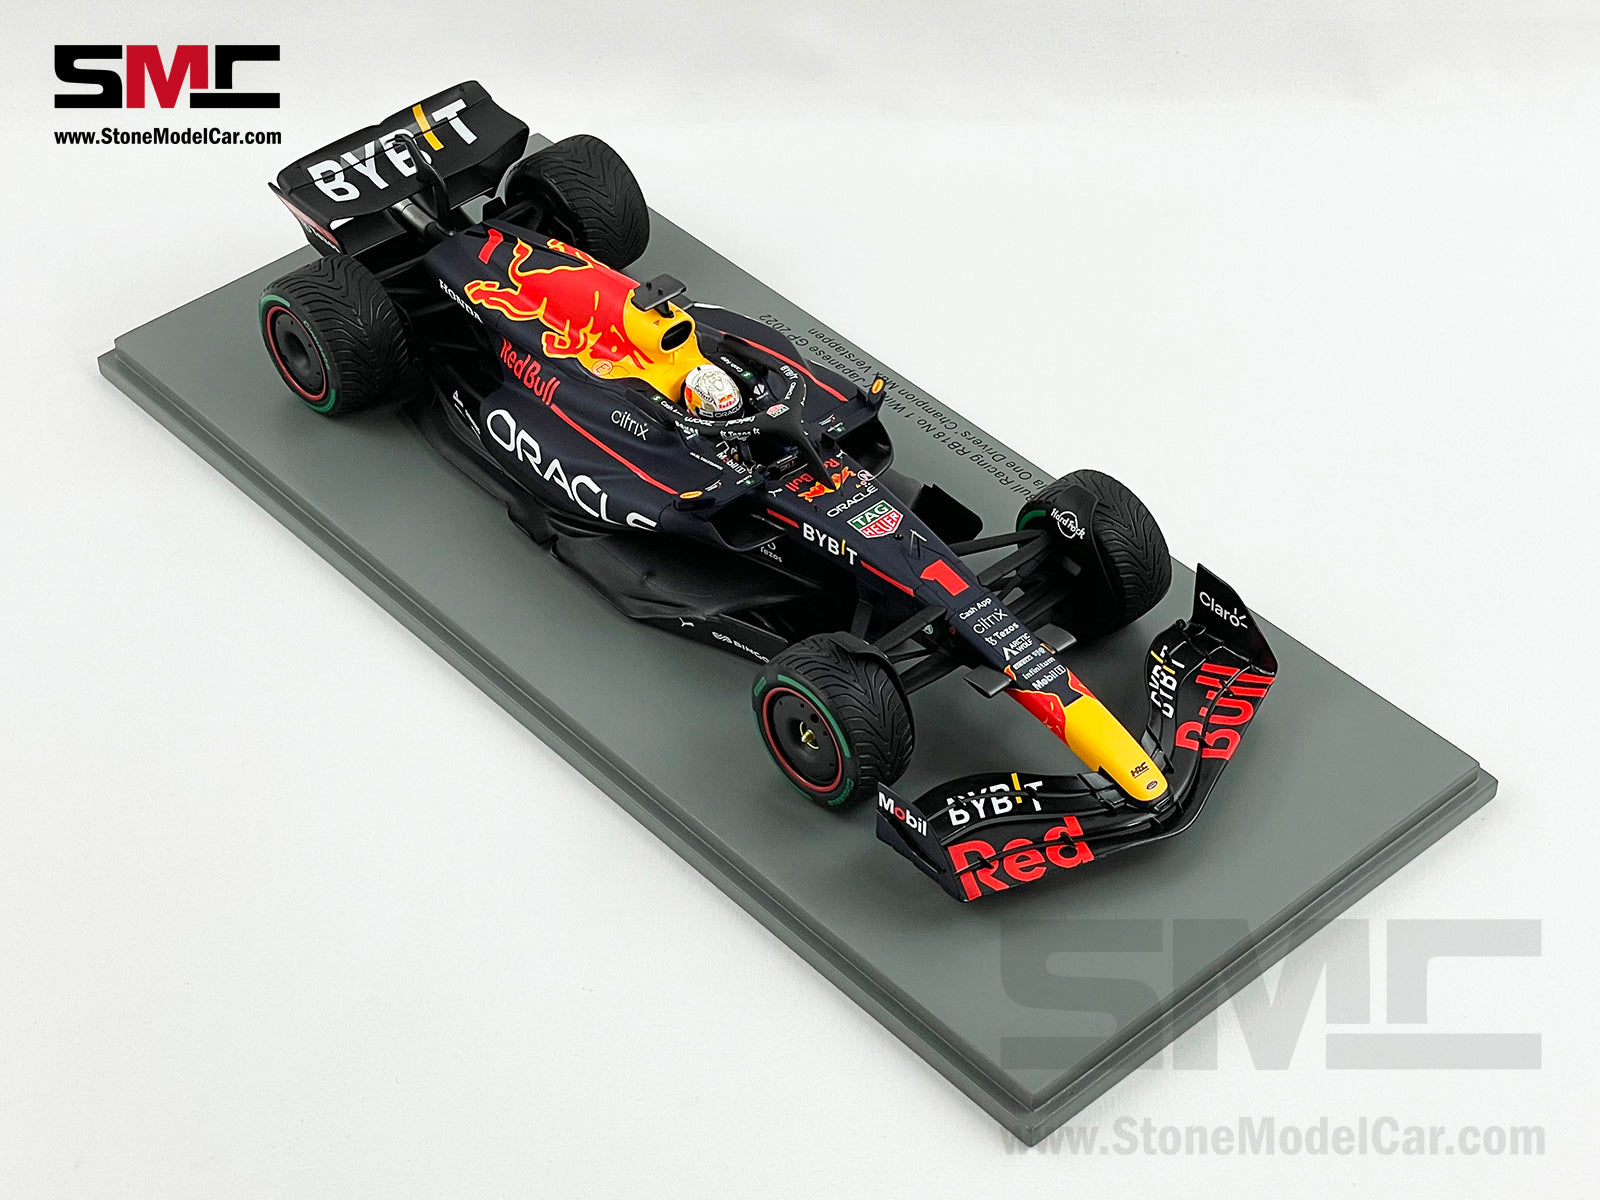 SPARK-MODEL 18S774 Scale 1/18  RED BULL F1 RB18 TEAM ORACLE RED BULL  RACING N 1 WINNER JAPAN GP WITH PIT BOARD WORLD CHAMPION 2022 MAX  VERSTAPPEN MATT BLUE YELLOW RED